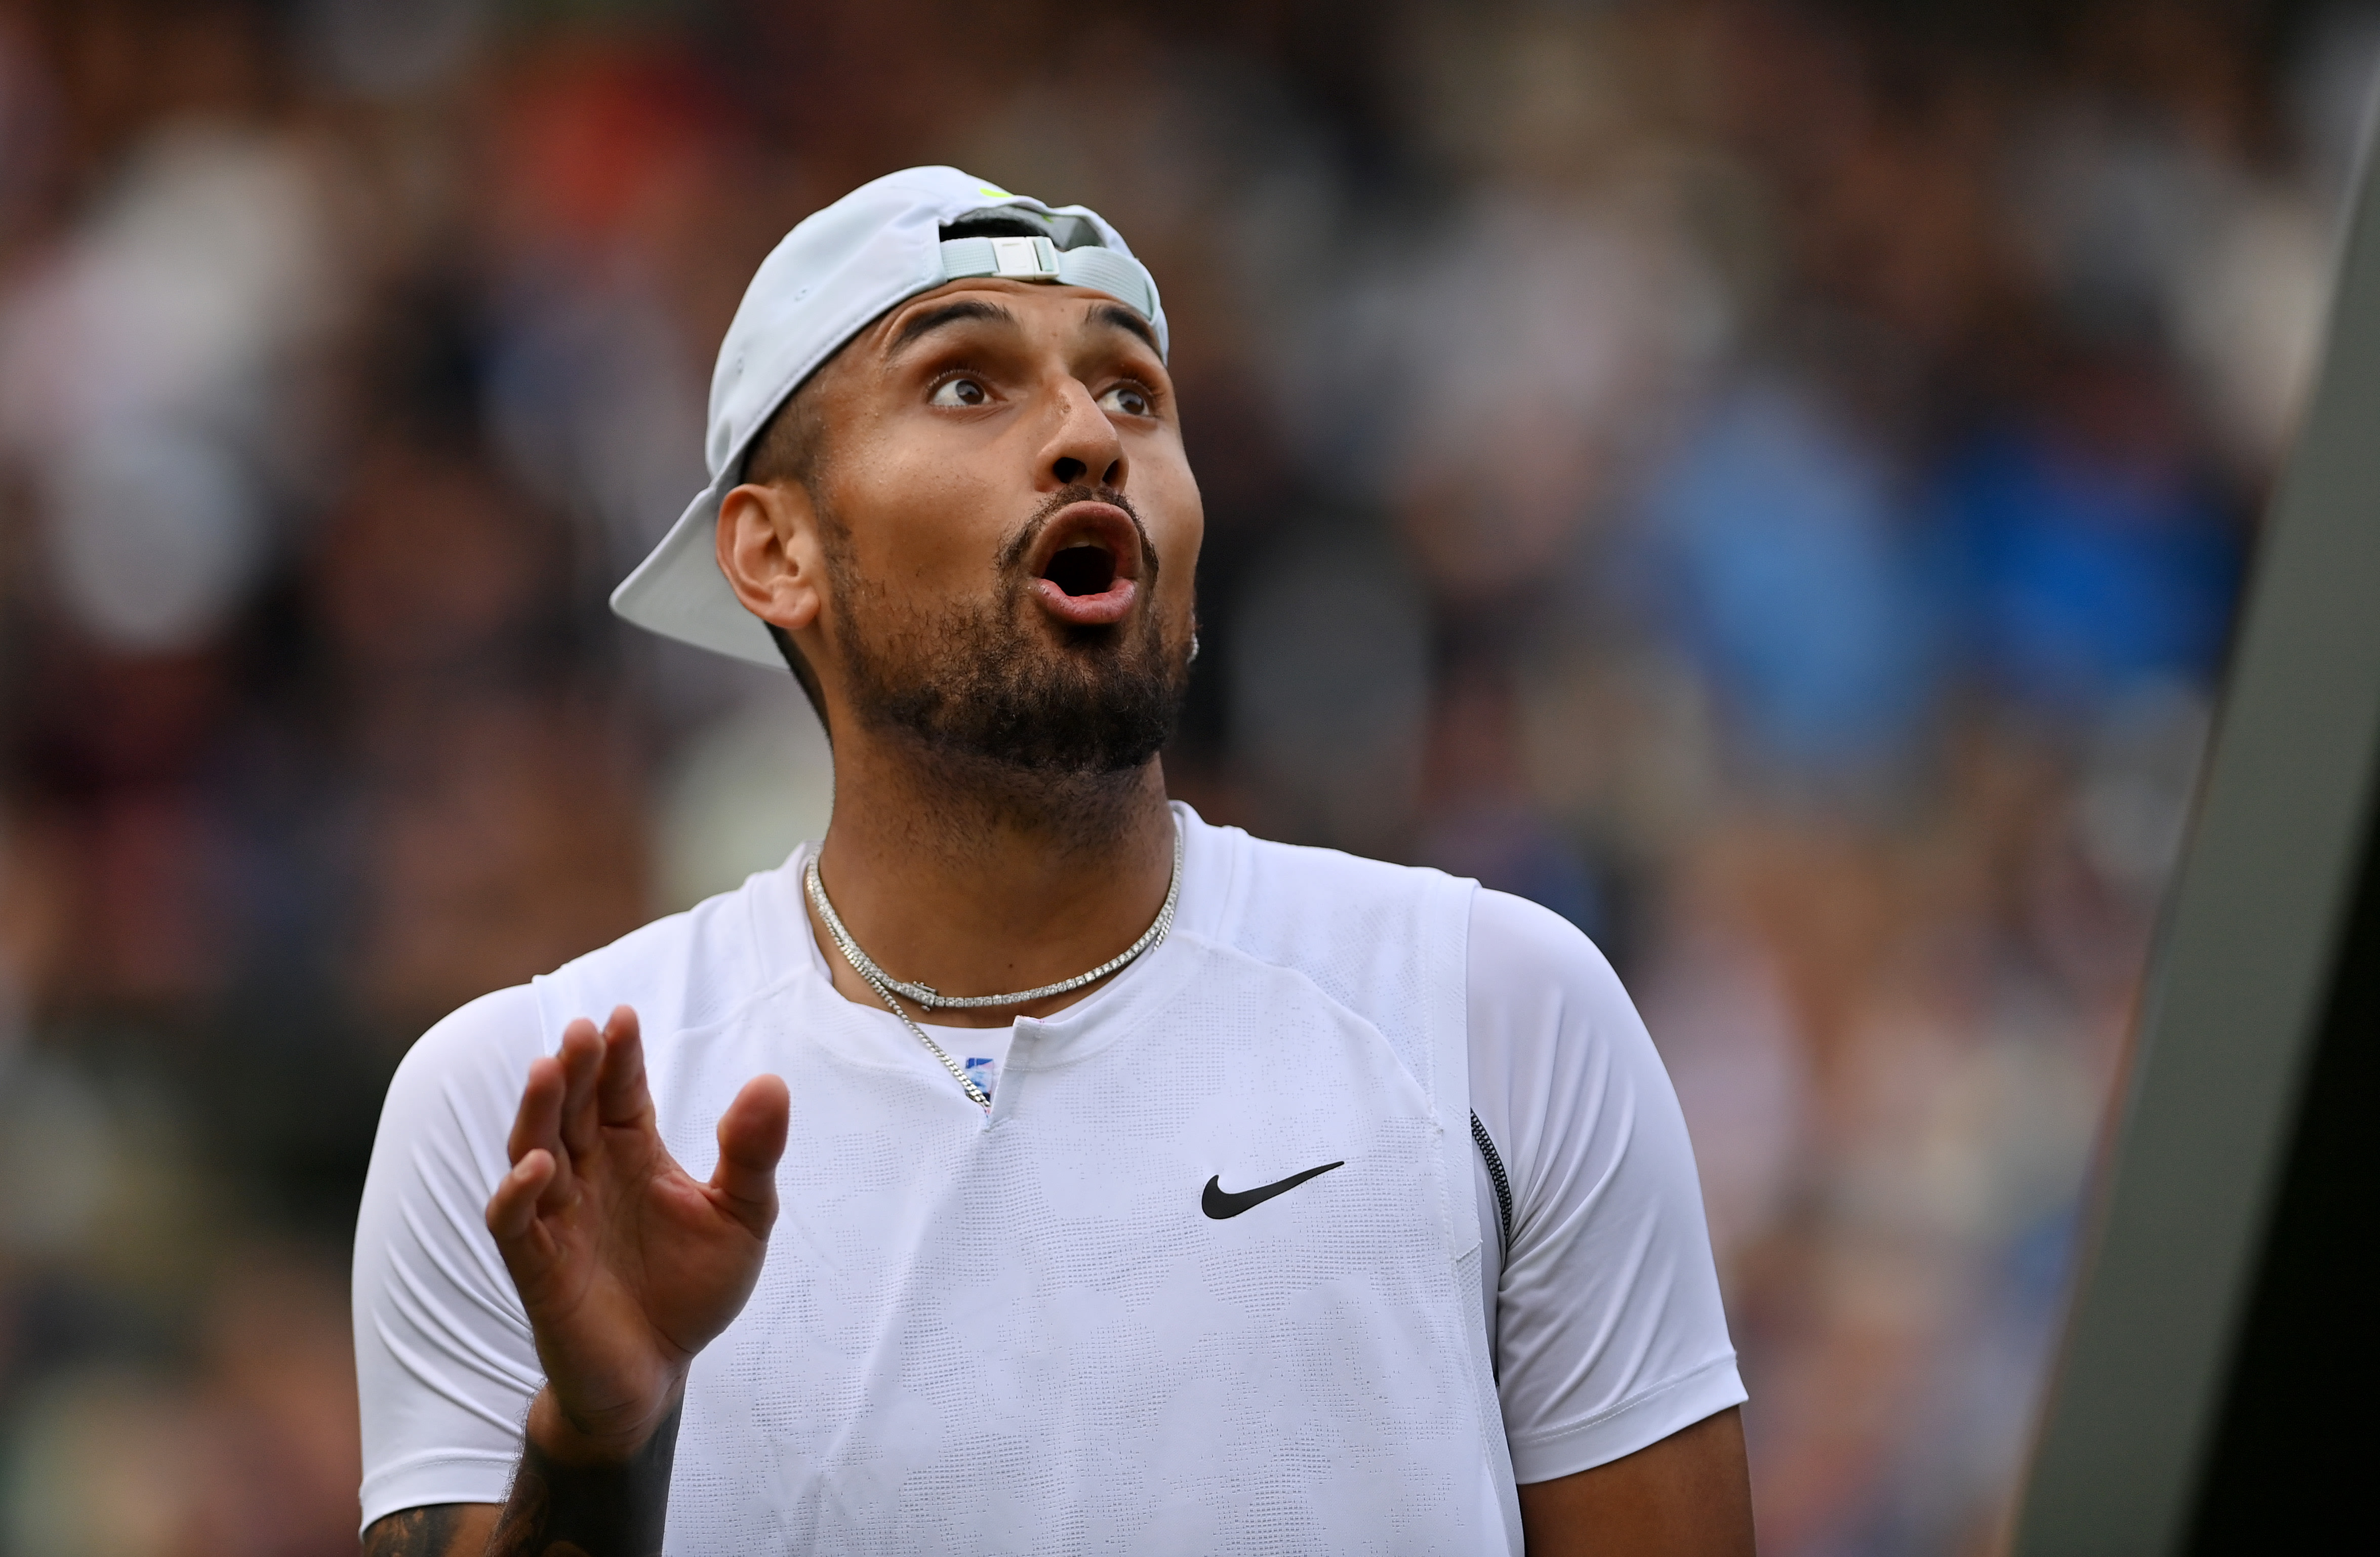 Nick Kyrgios calls for Stefanos Tsitsipas default after Greek nearly hits person with ball—then prevails in chaotic Wimbledon classic